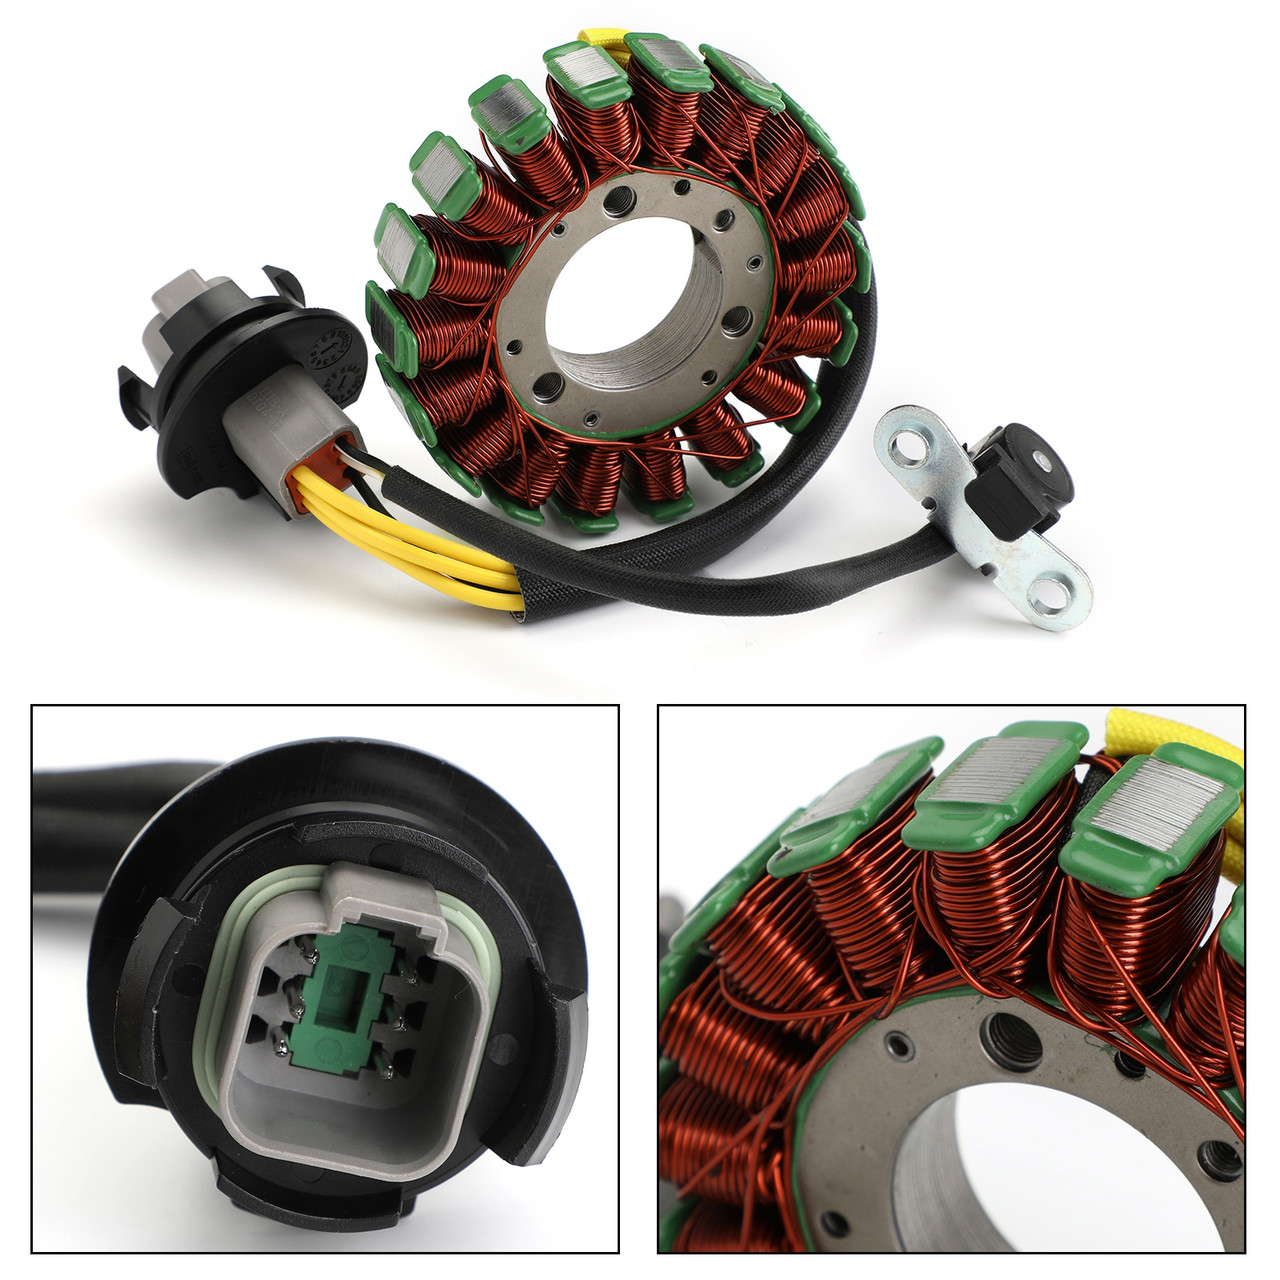 Details about   Sea Doo GTX GTI GTS 130 155 stator charge coil generator flywheel magneto hub 